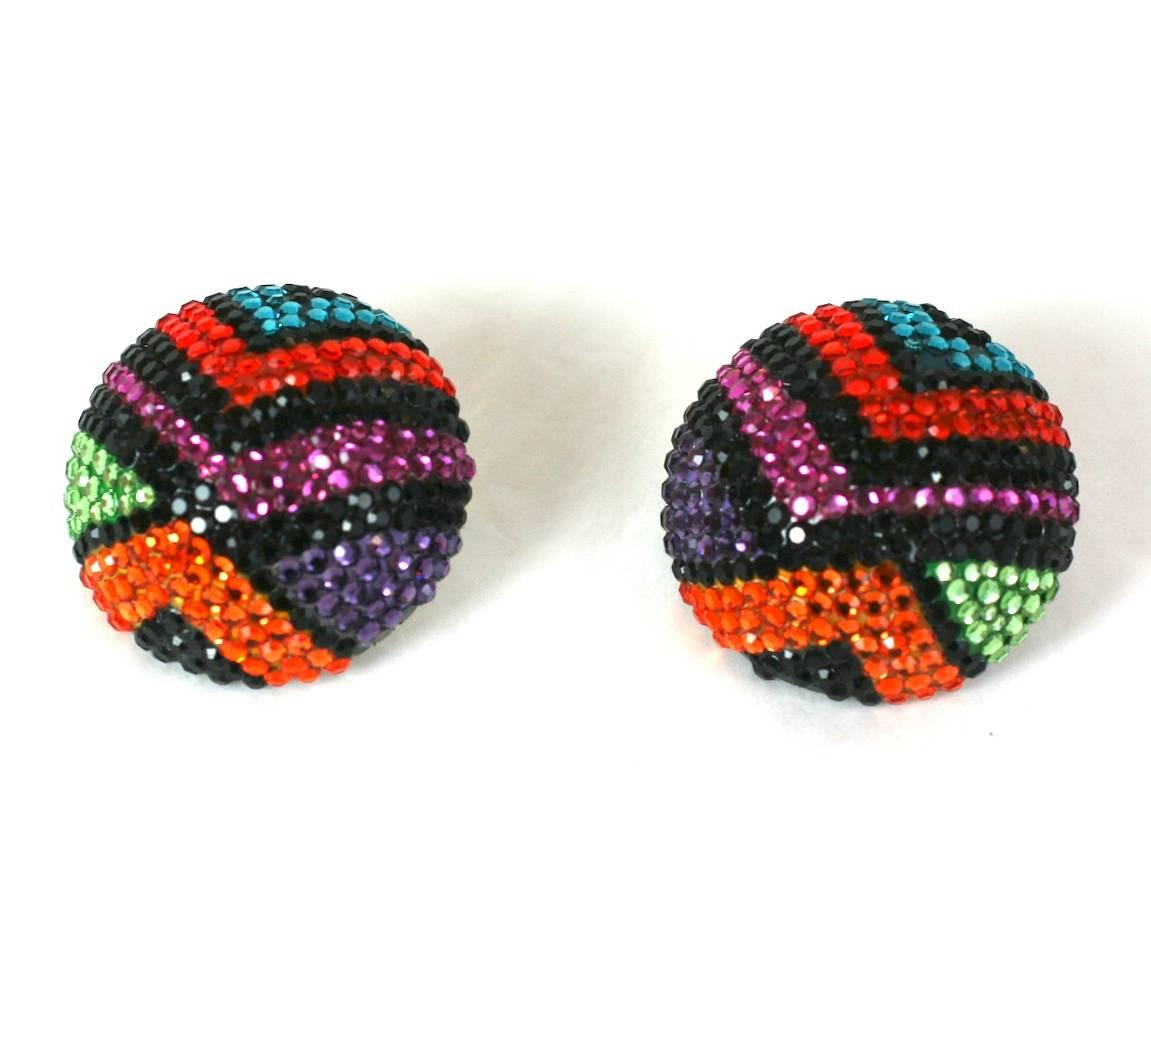 Large and striking multicolor pave rhinestone dome earrings, completely hand pave set in a vibrant Deco design. Clip back fittings. 1.5